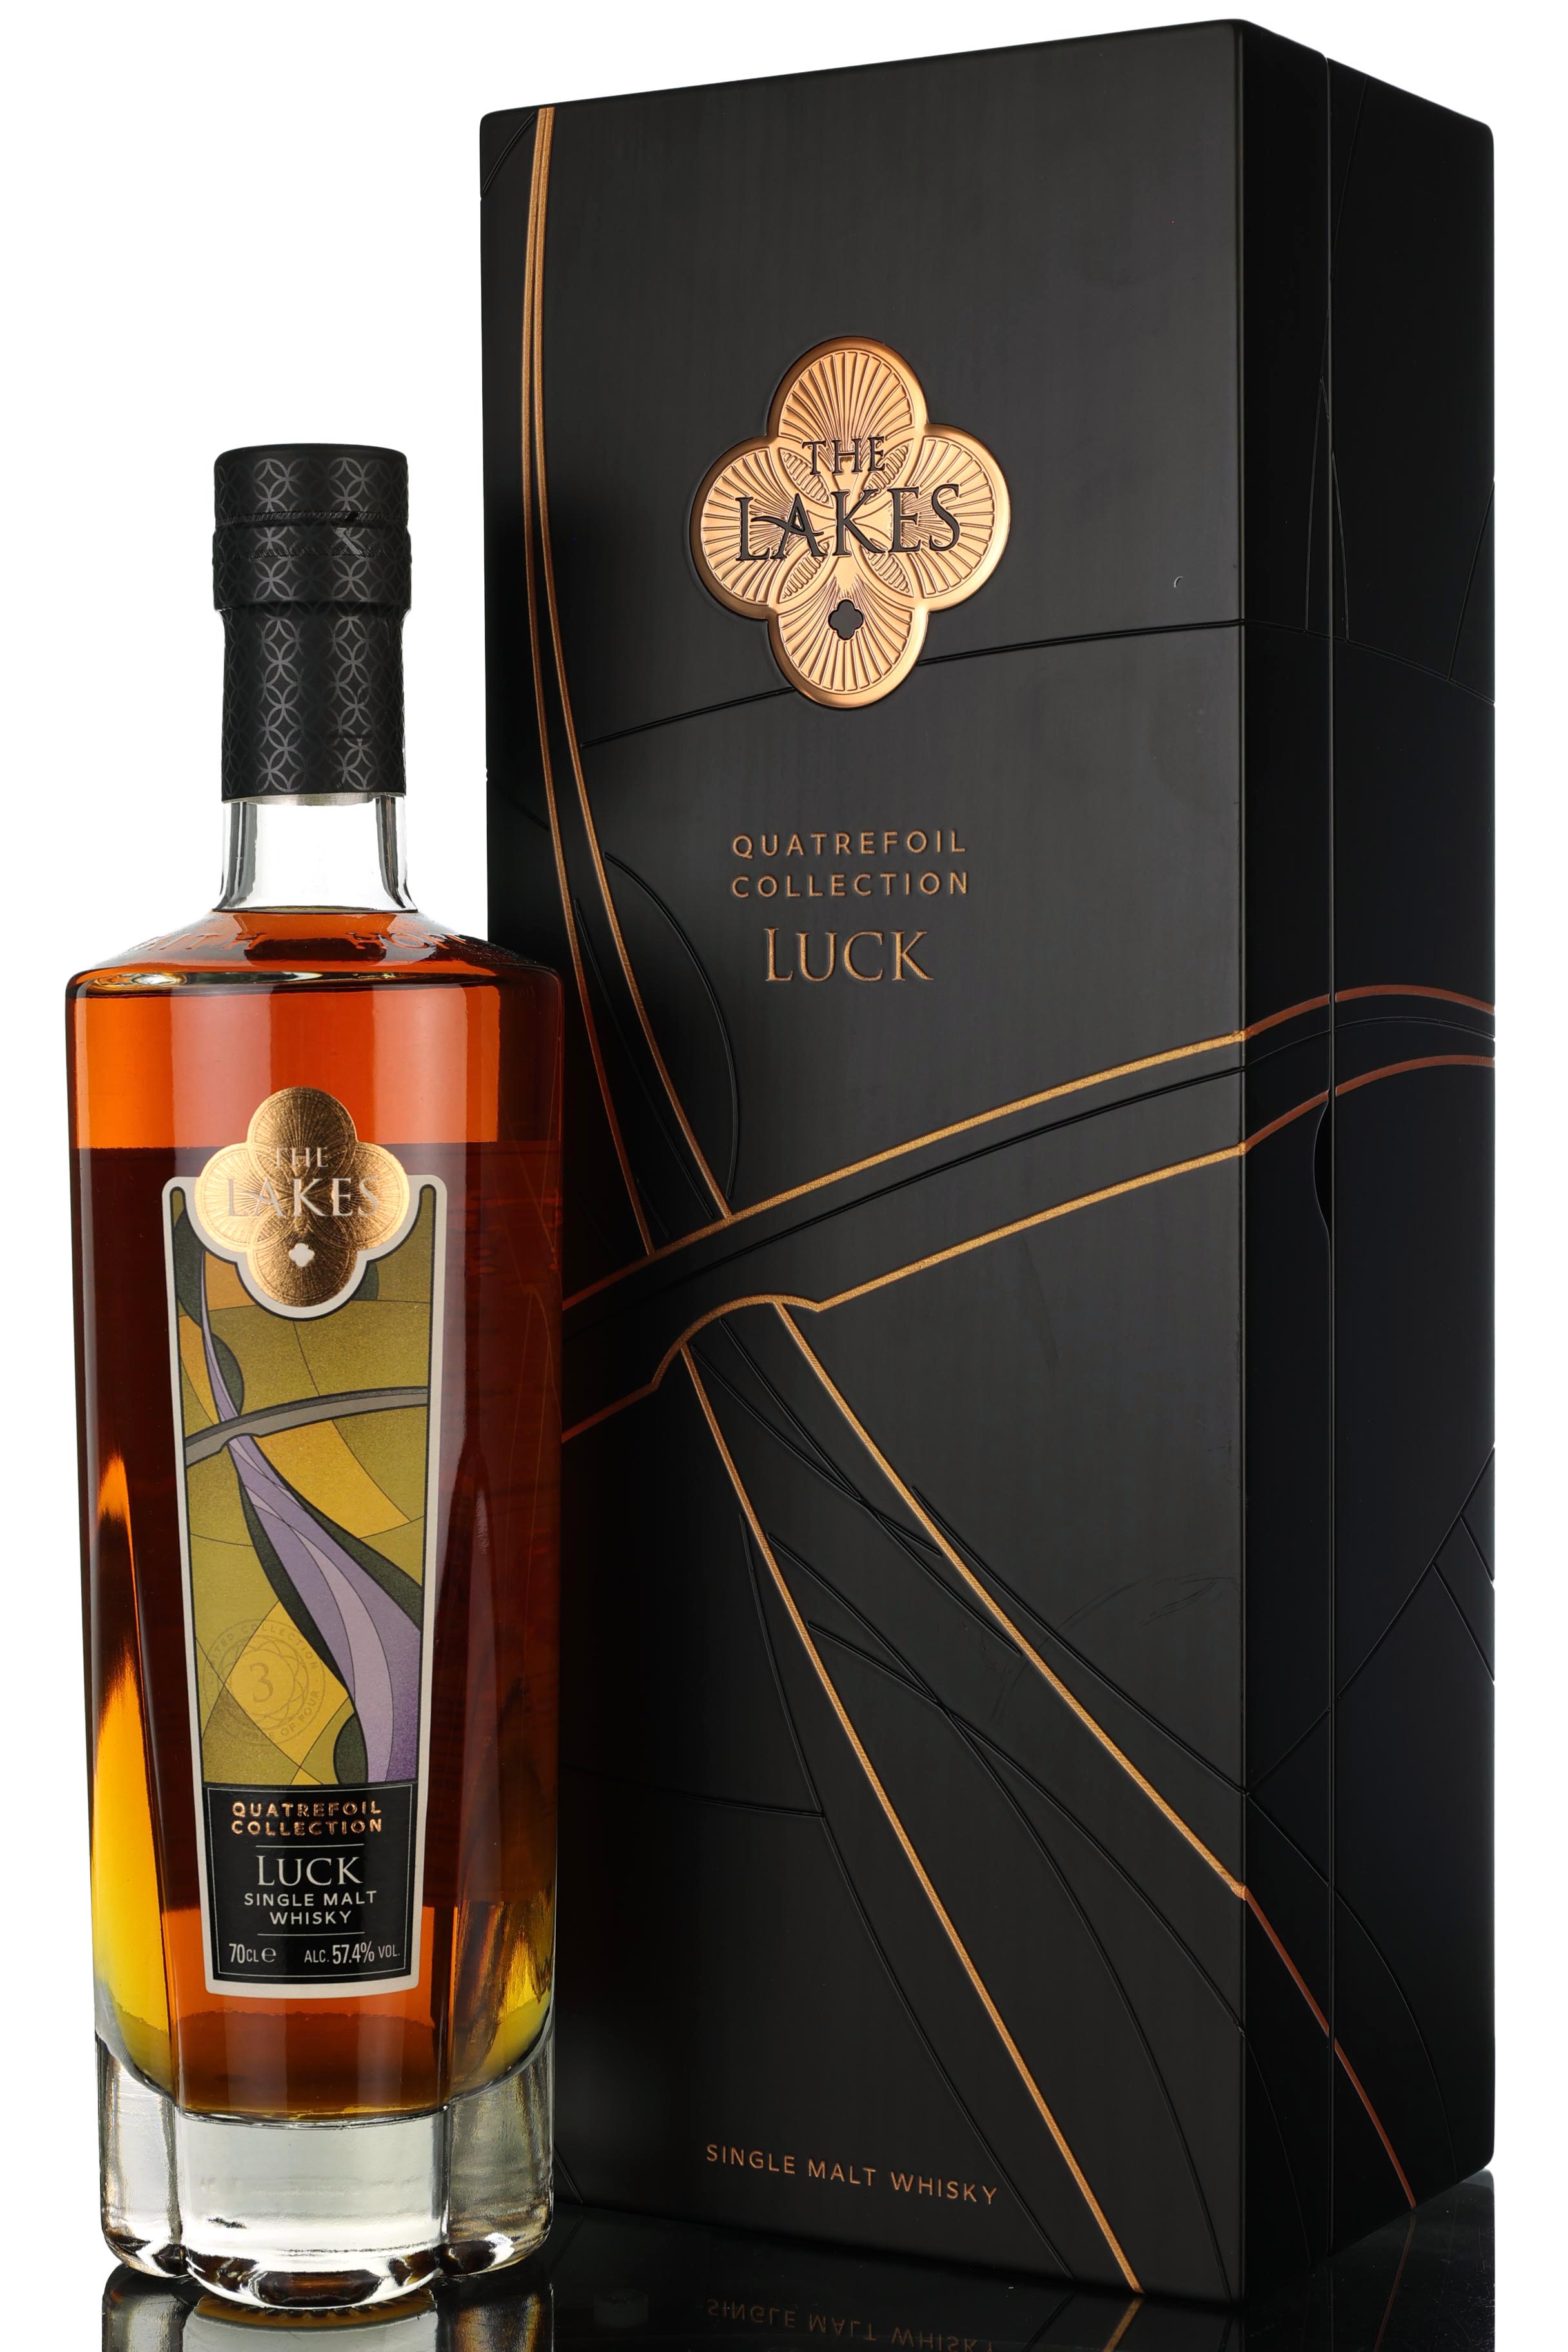 The Lakes Quatrefoil Collection - Luck - 3rd Release - 2020 Release